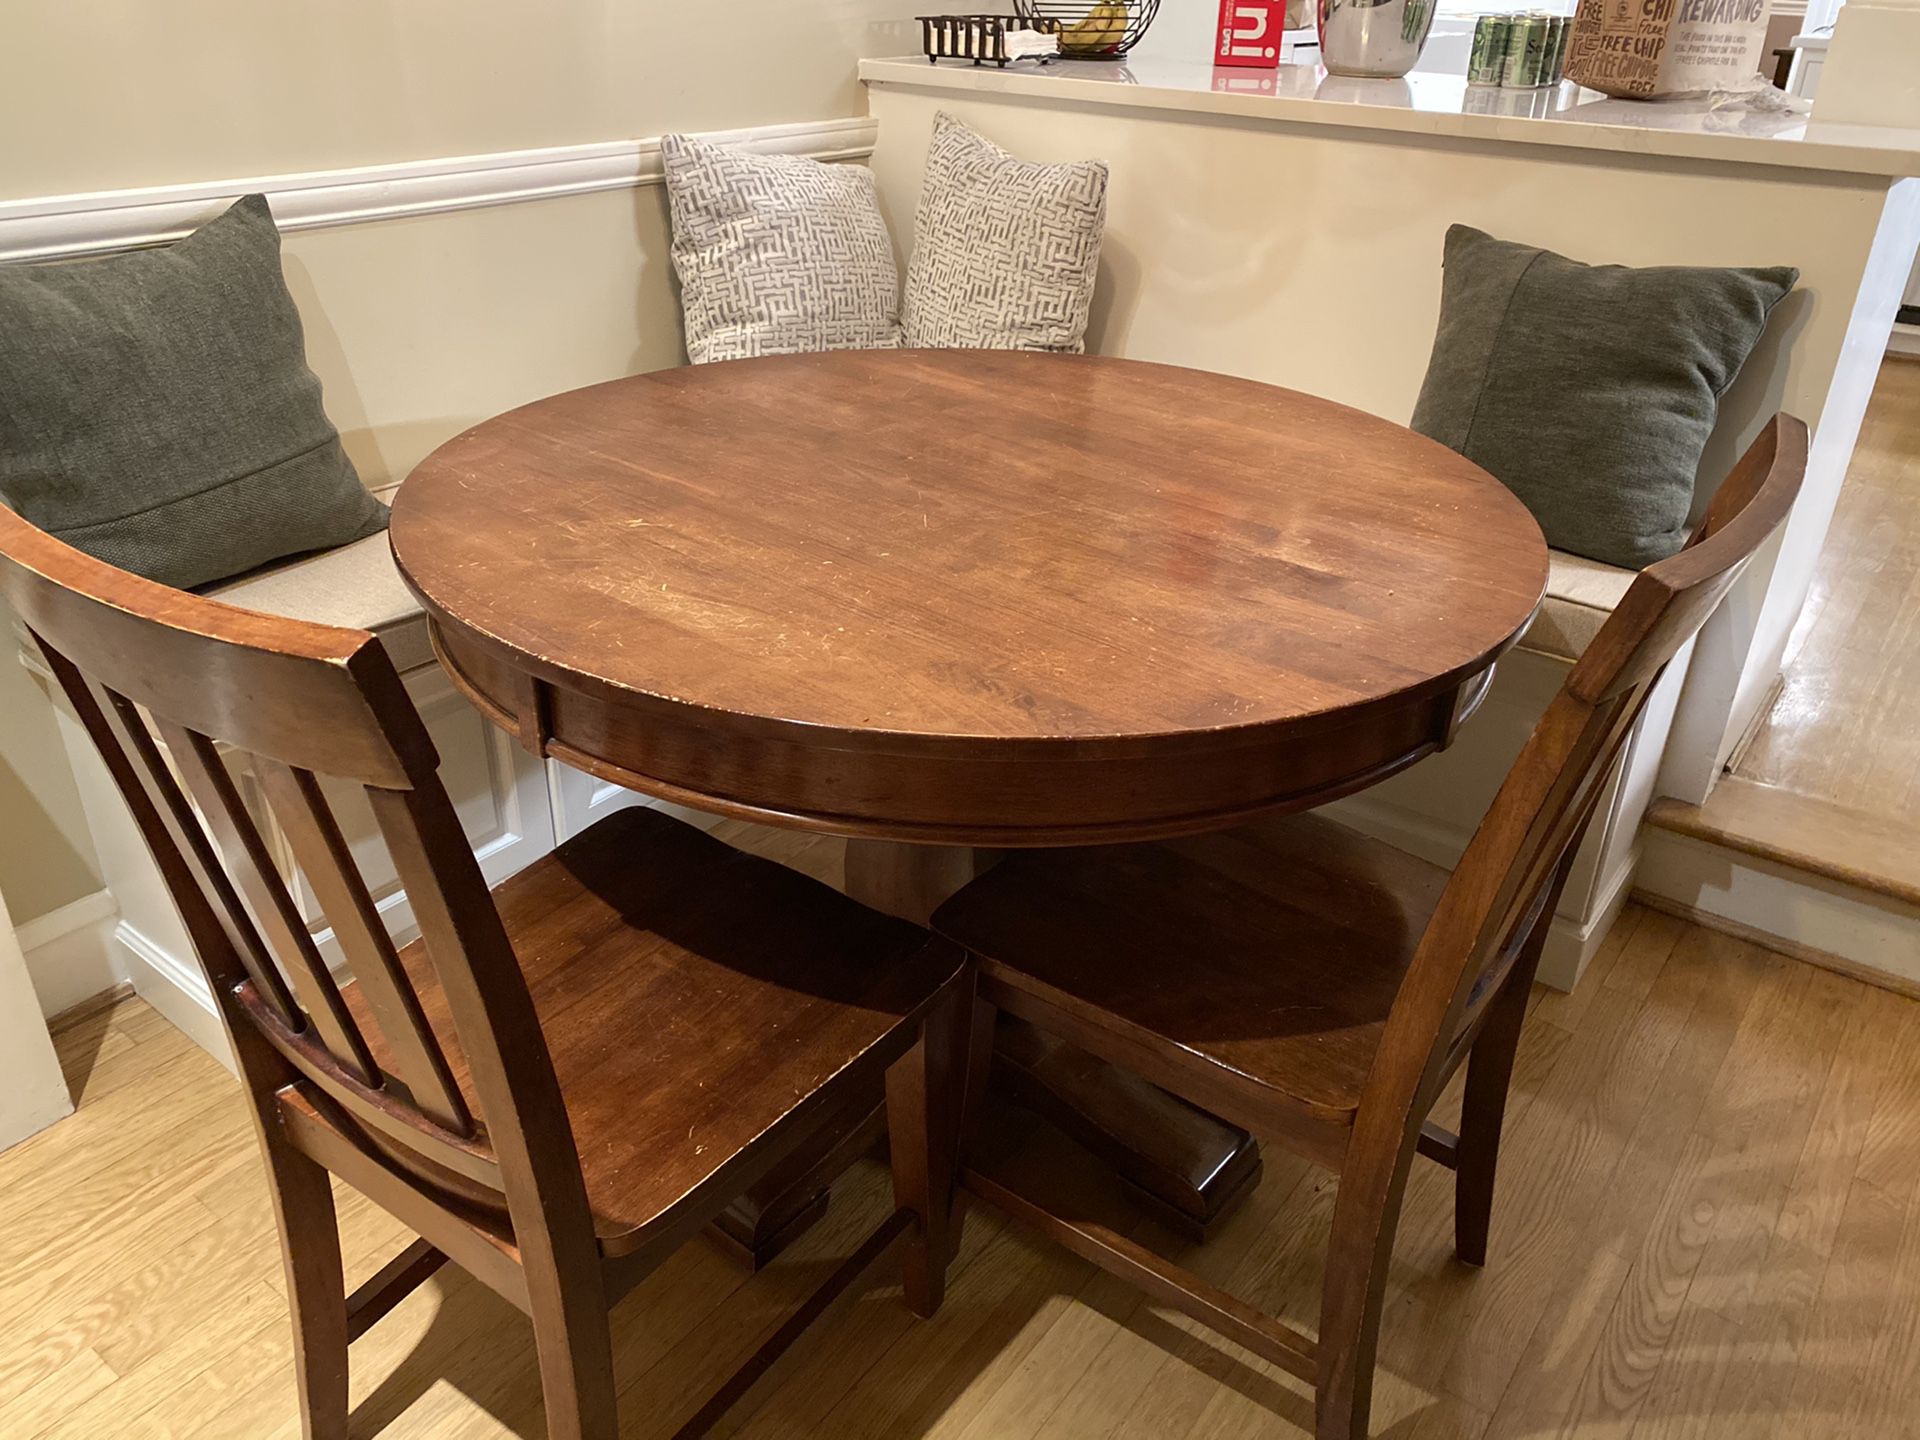 Solid wood 45” round pedestal table with 4 chairs